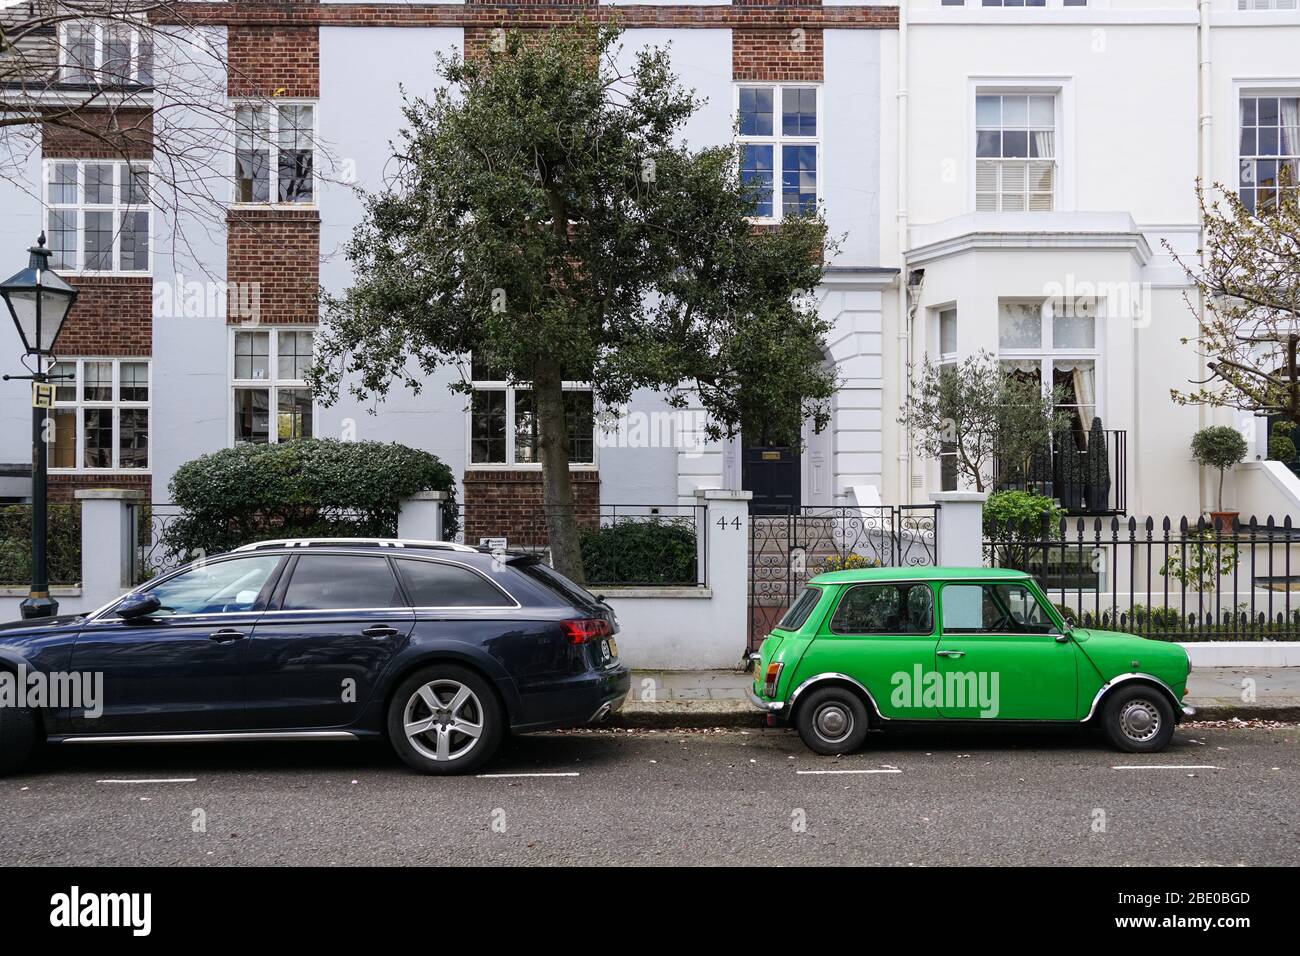 Old vintage two-door Morris Mini Cooper car parked next to modern Audi A4 Avant car in front of residential buildings London England United Kingdom UK Stock Photo